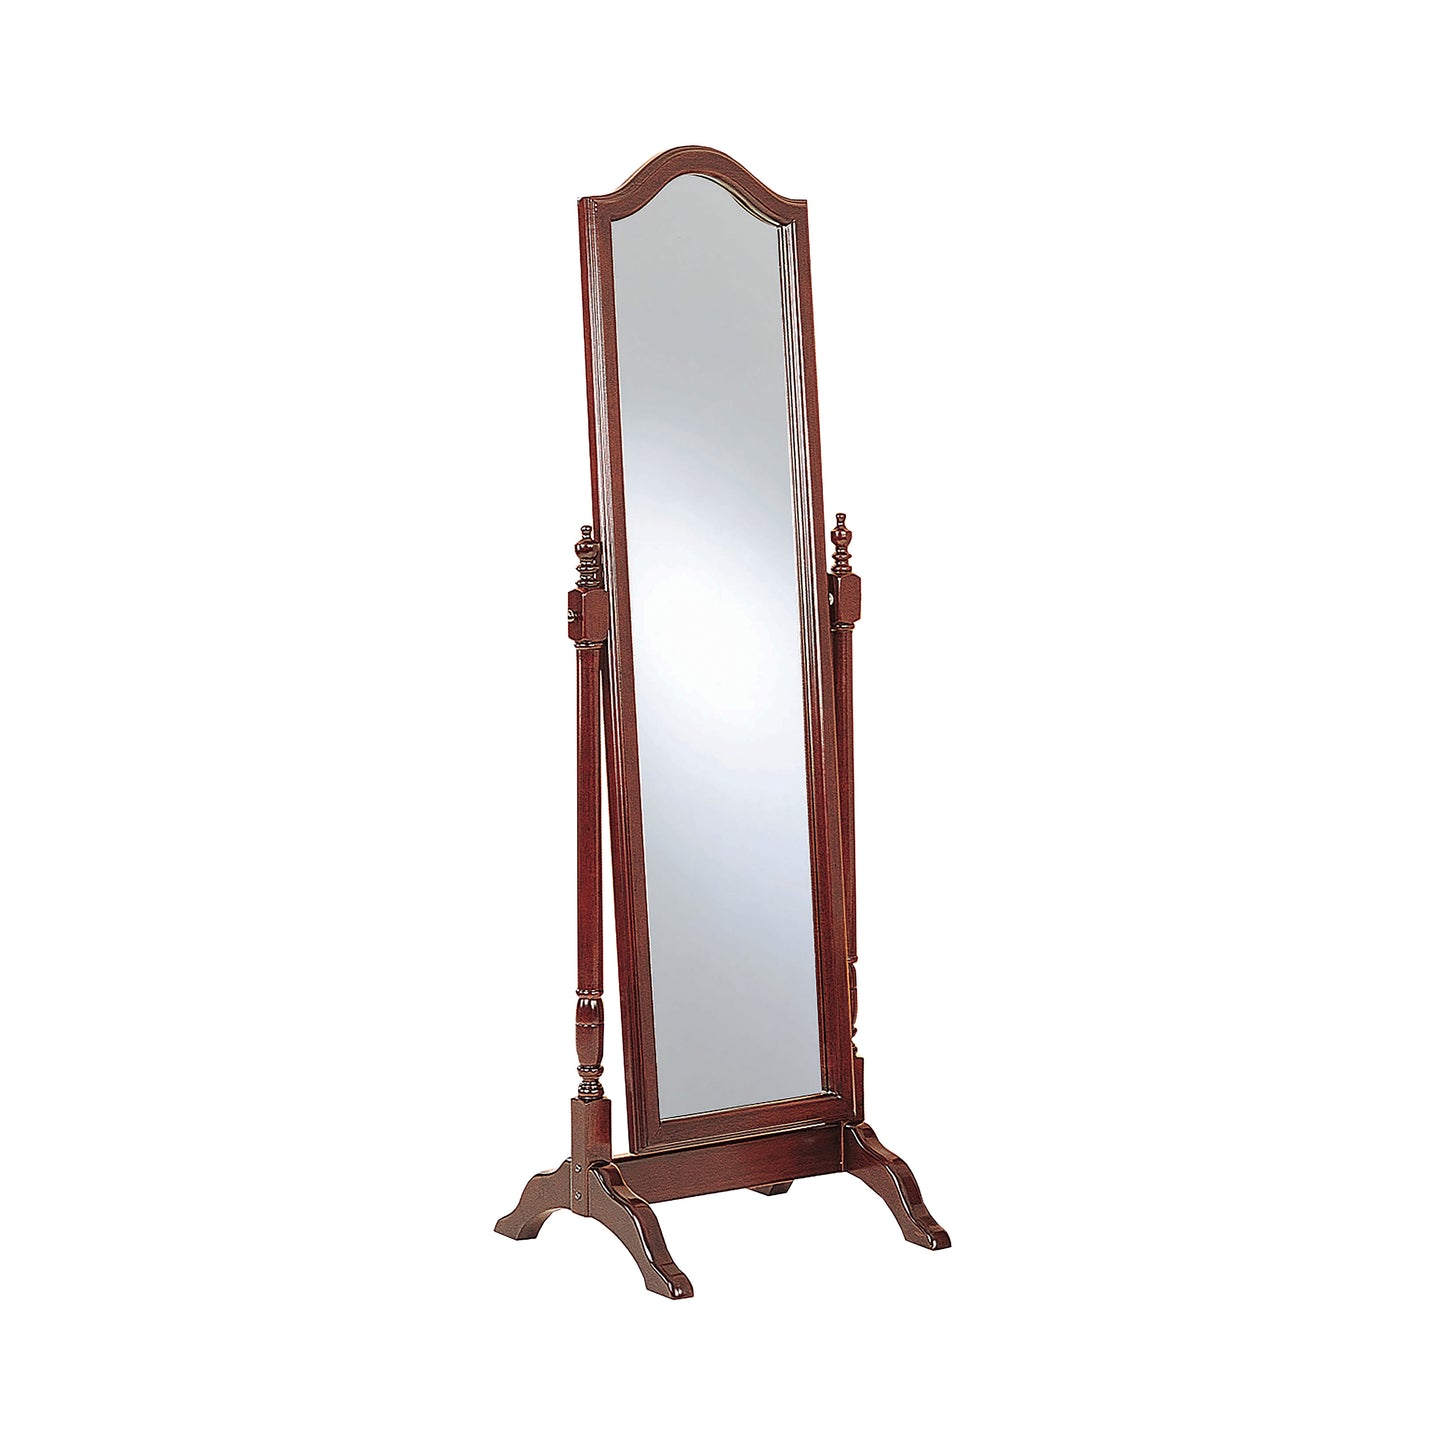 Rectangular Cheval Mirror With Arched Top Merlot - 3103